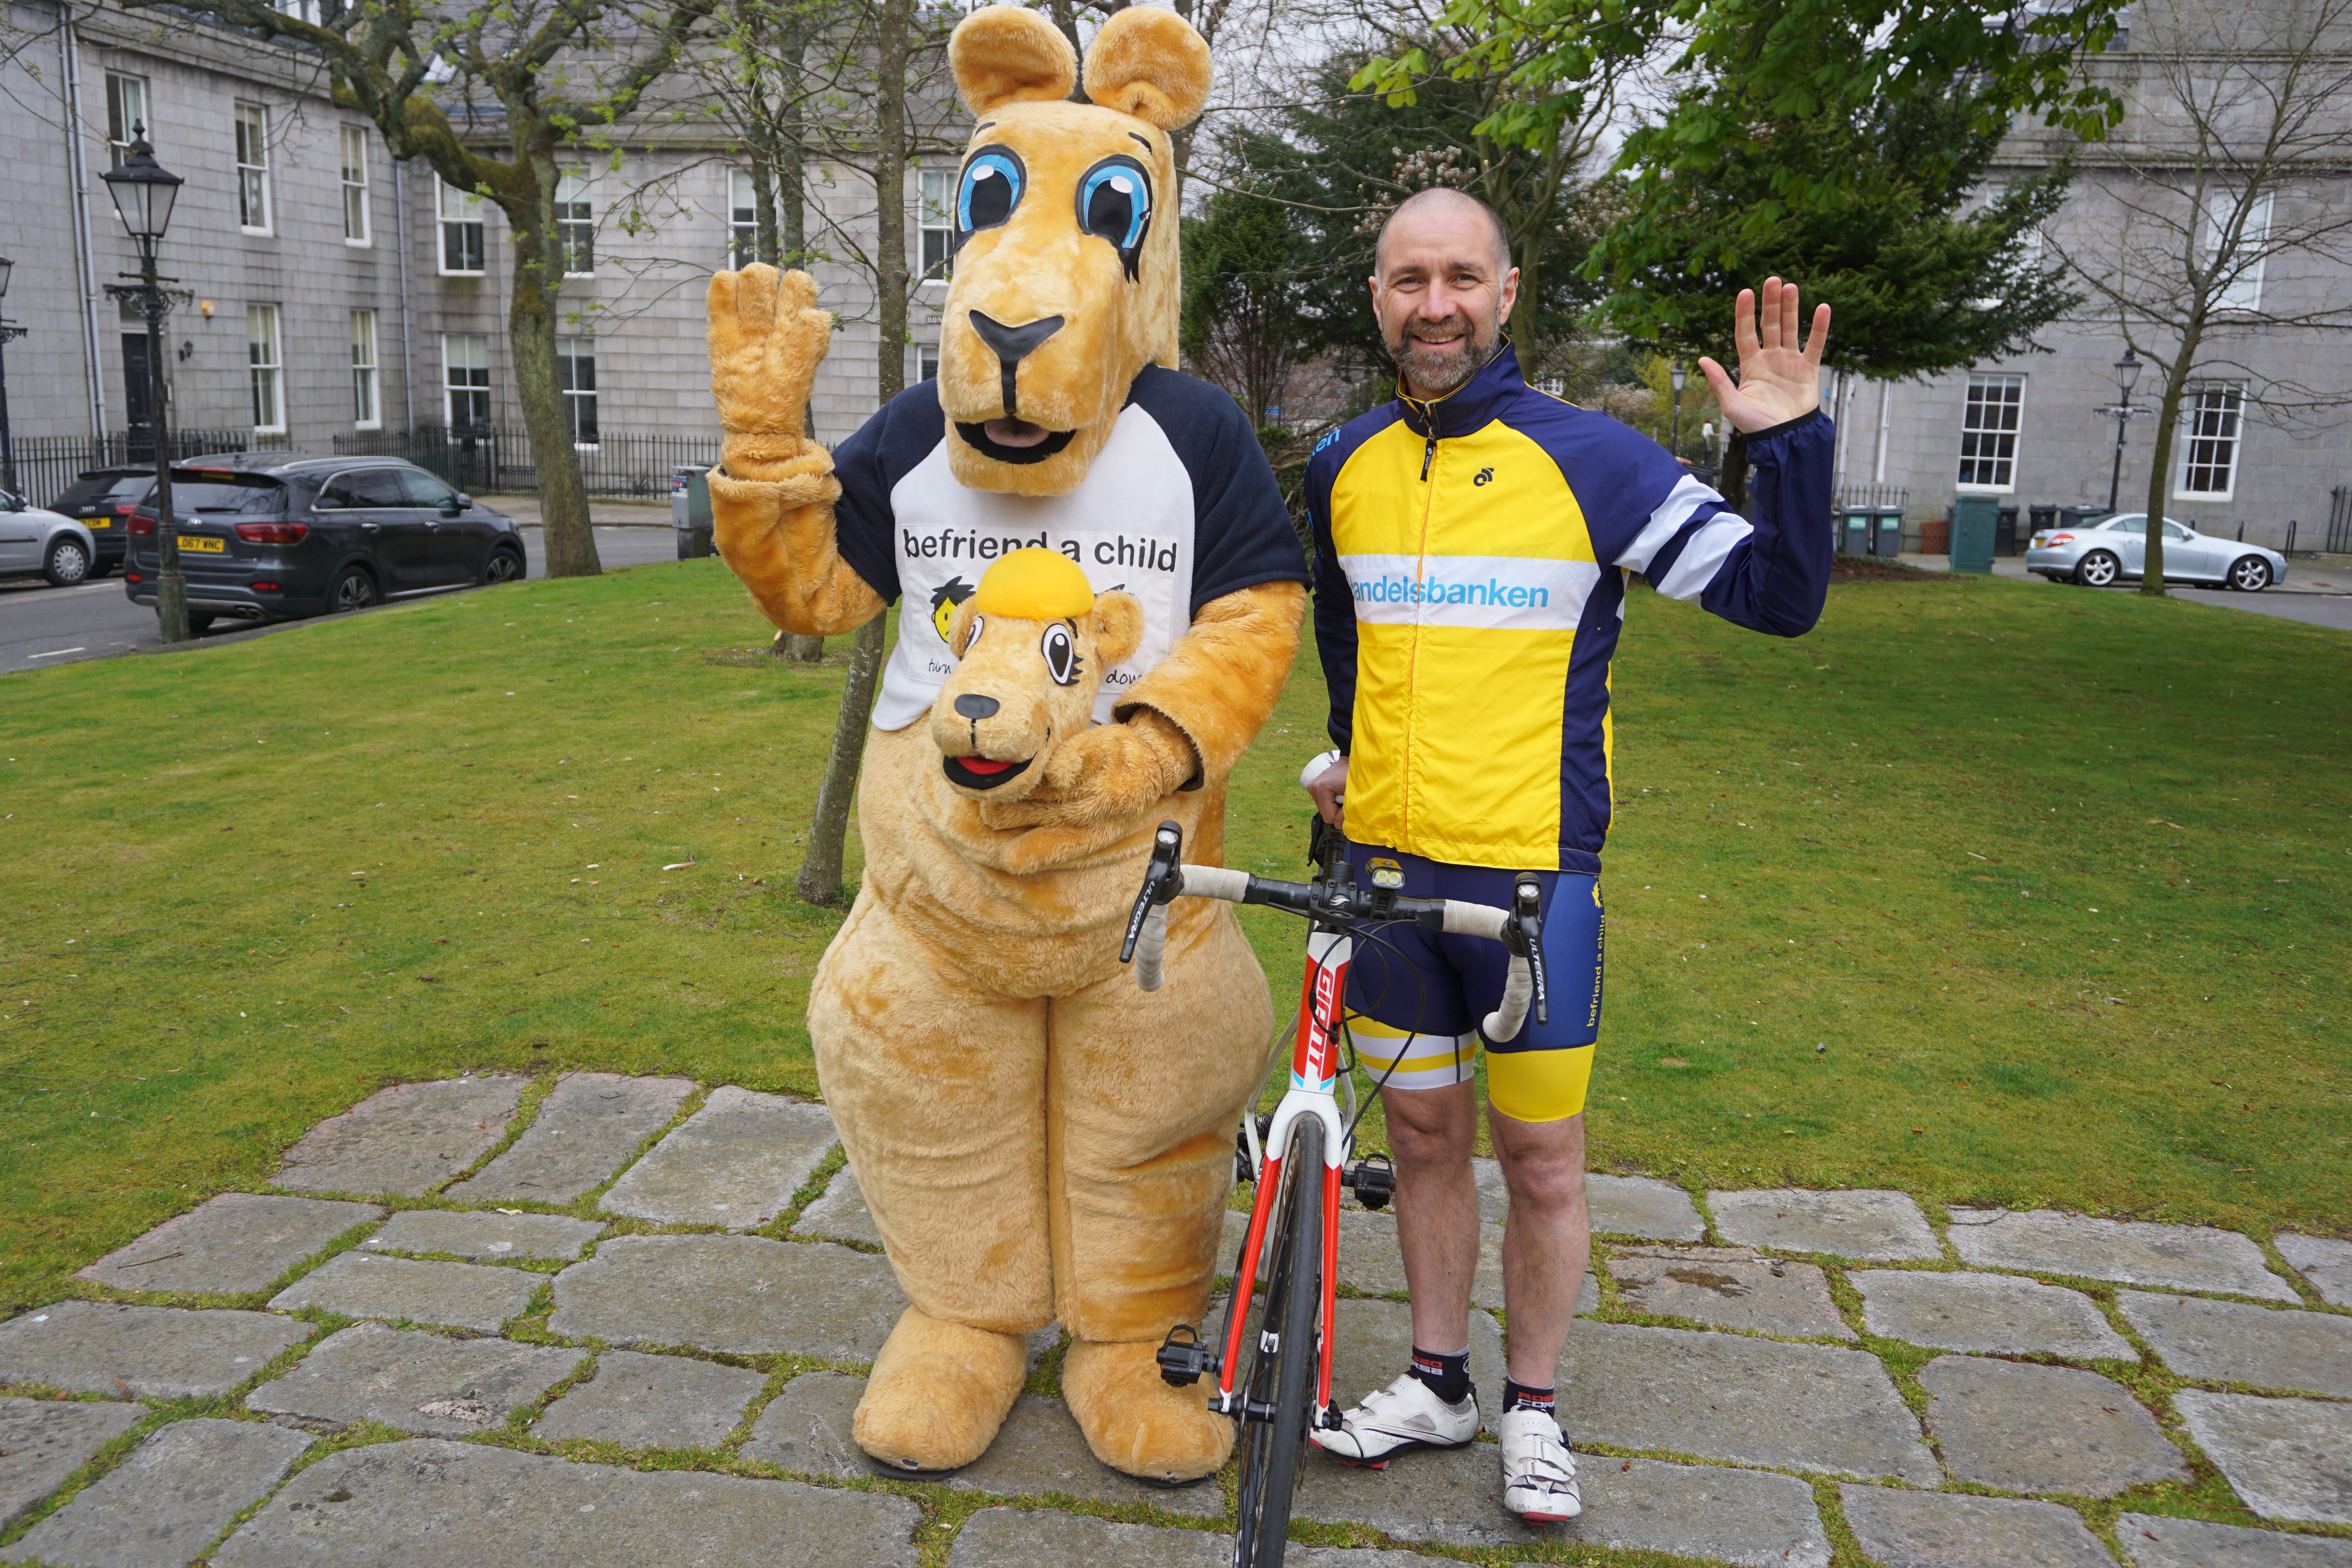 Steve Rae (right) with Kuddles the Befriend a Child mascot.